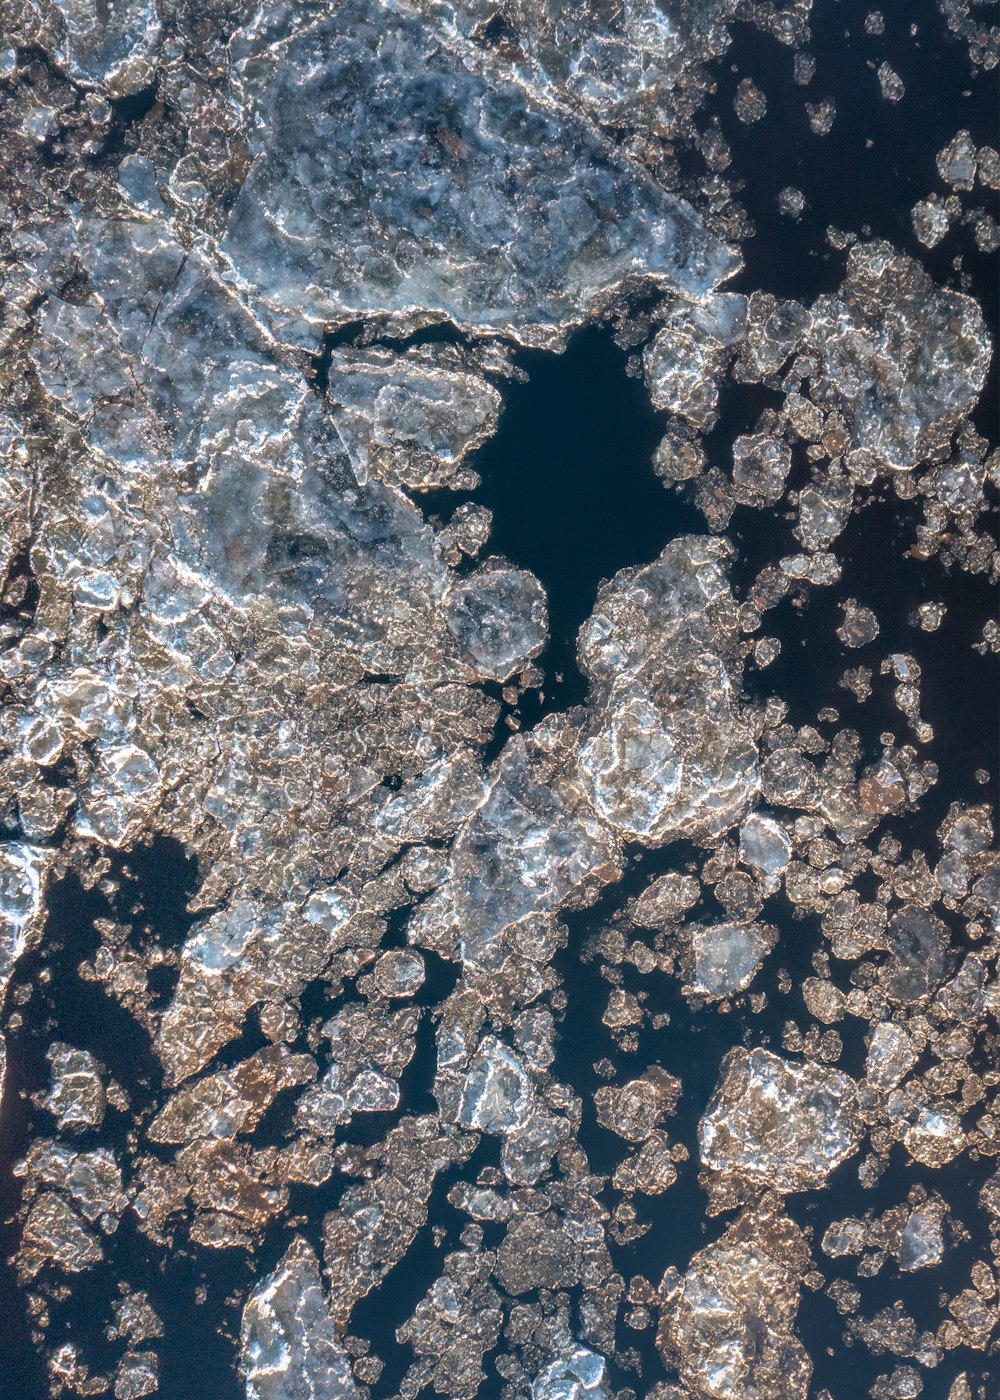 a view of the surface of a body of water